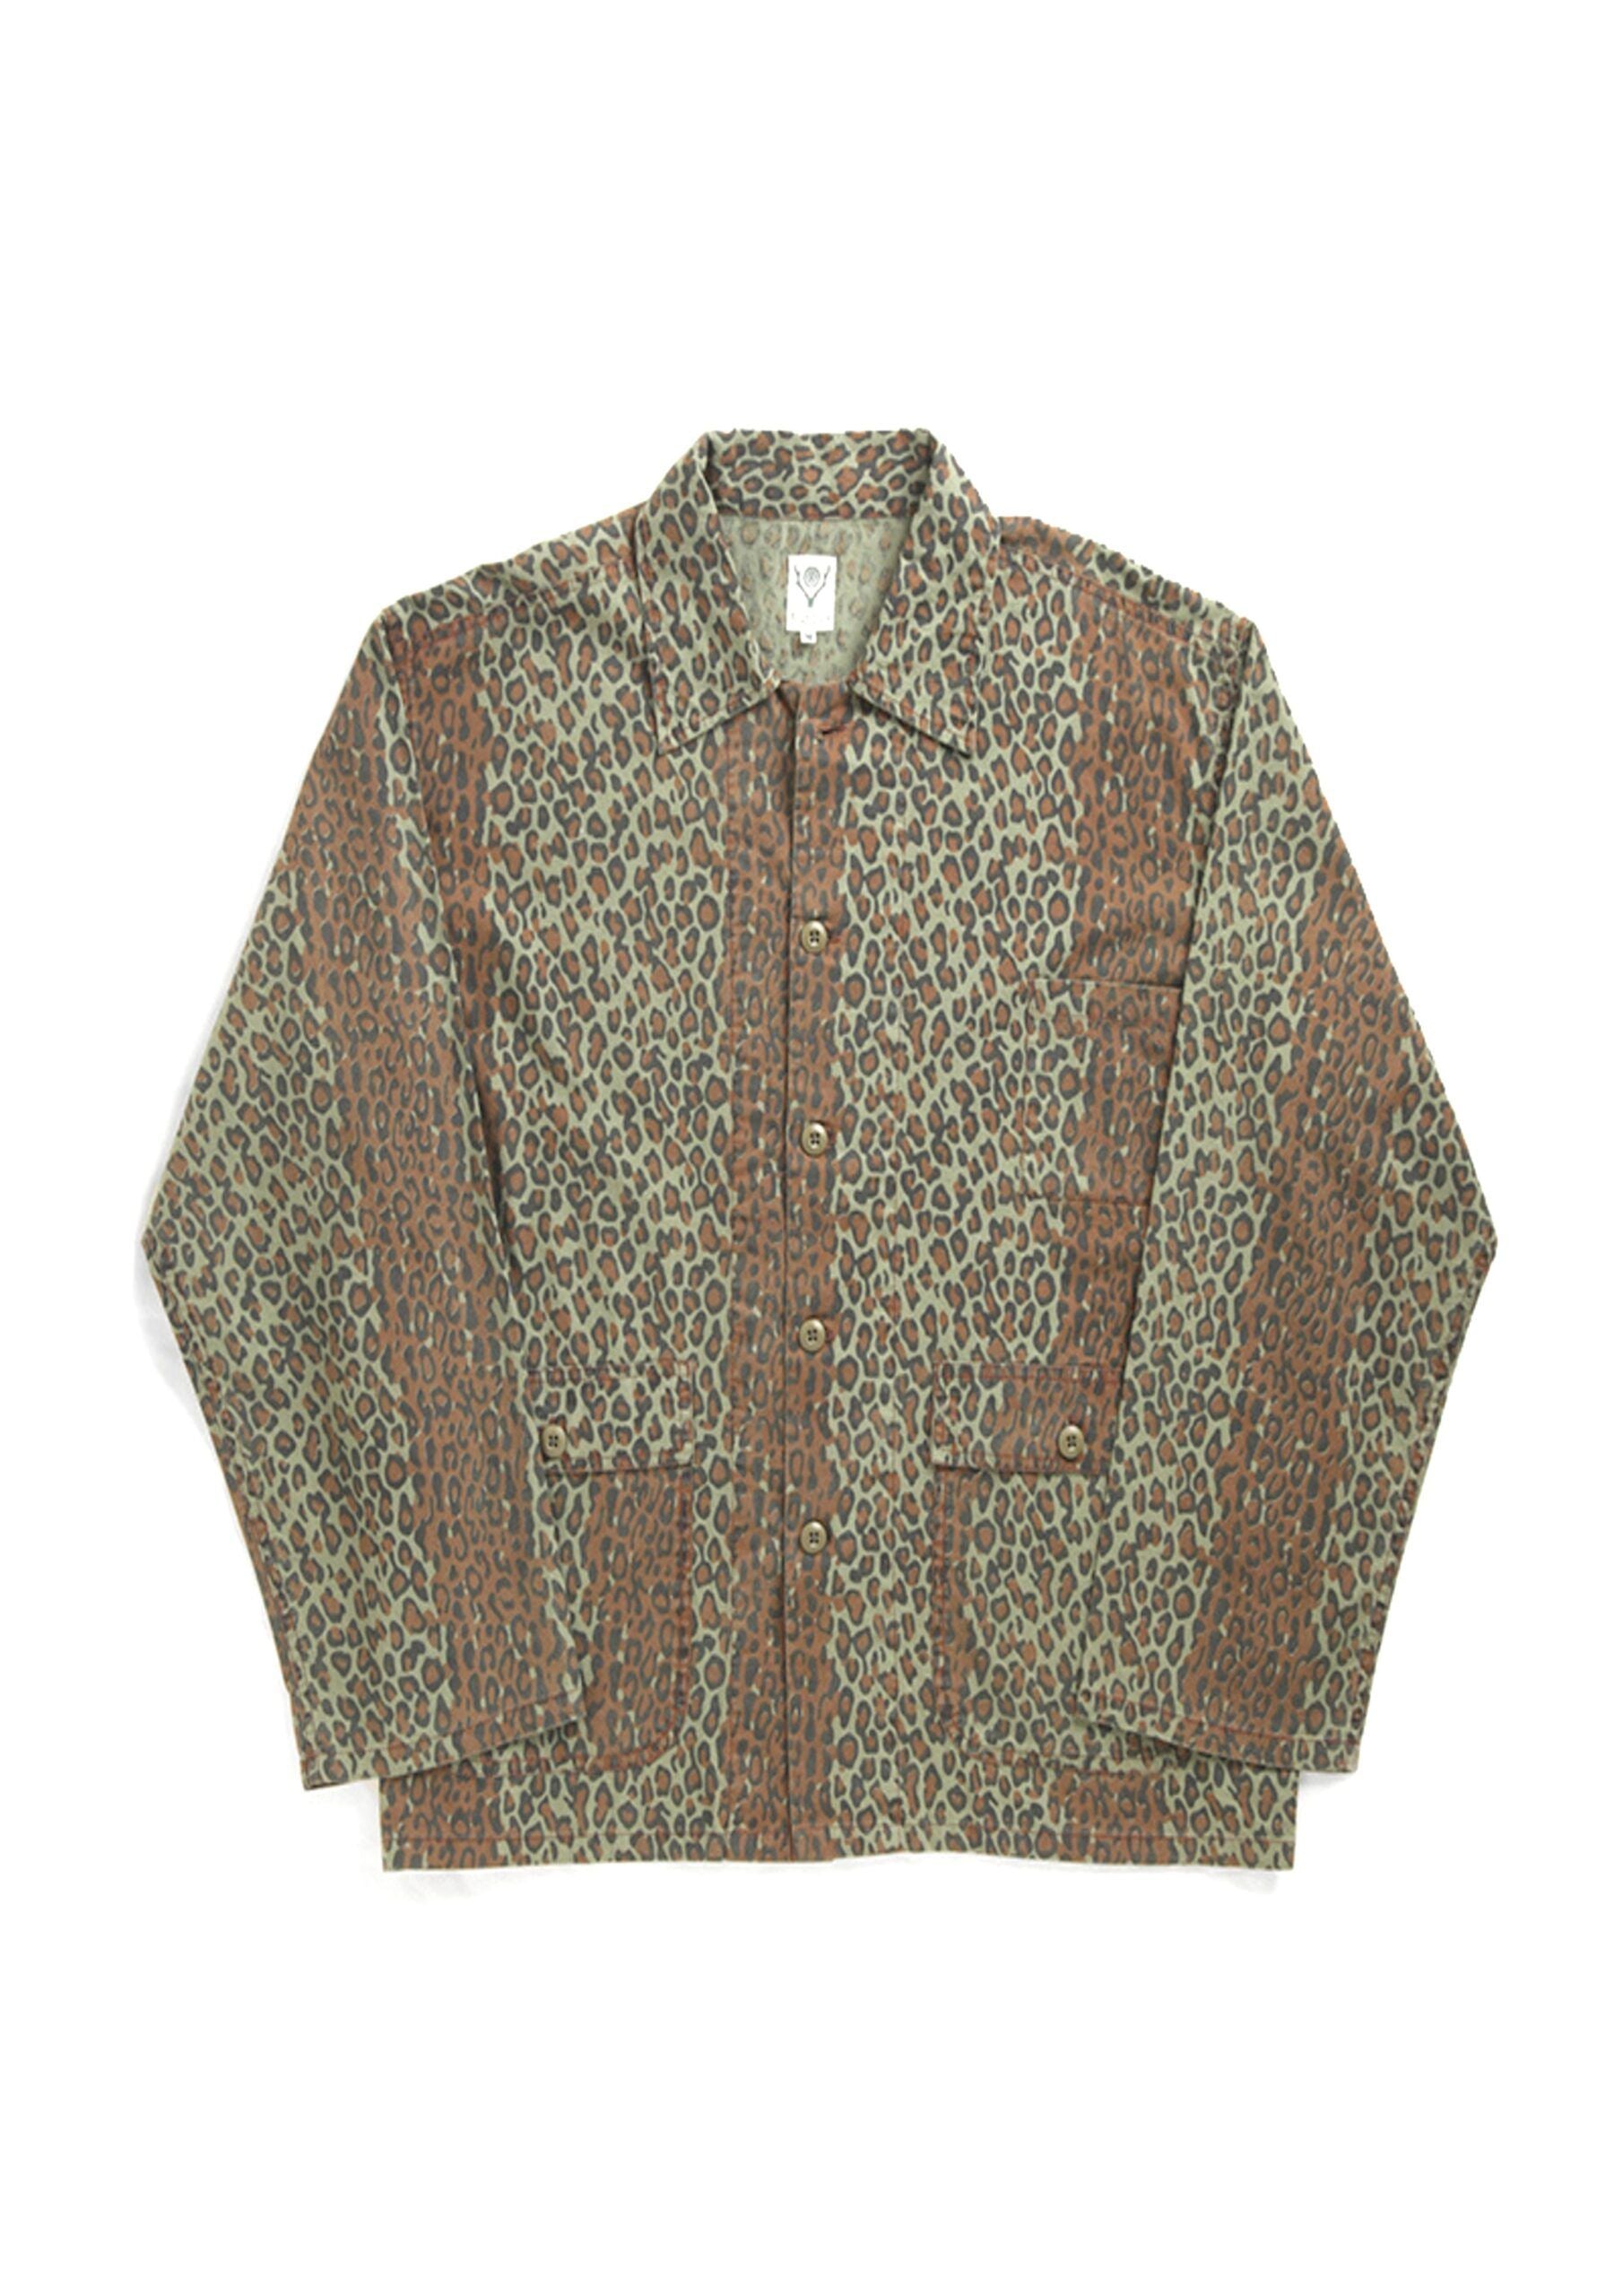 SOUTH2 WEST8 HUNTING SHIRT